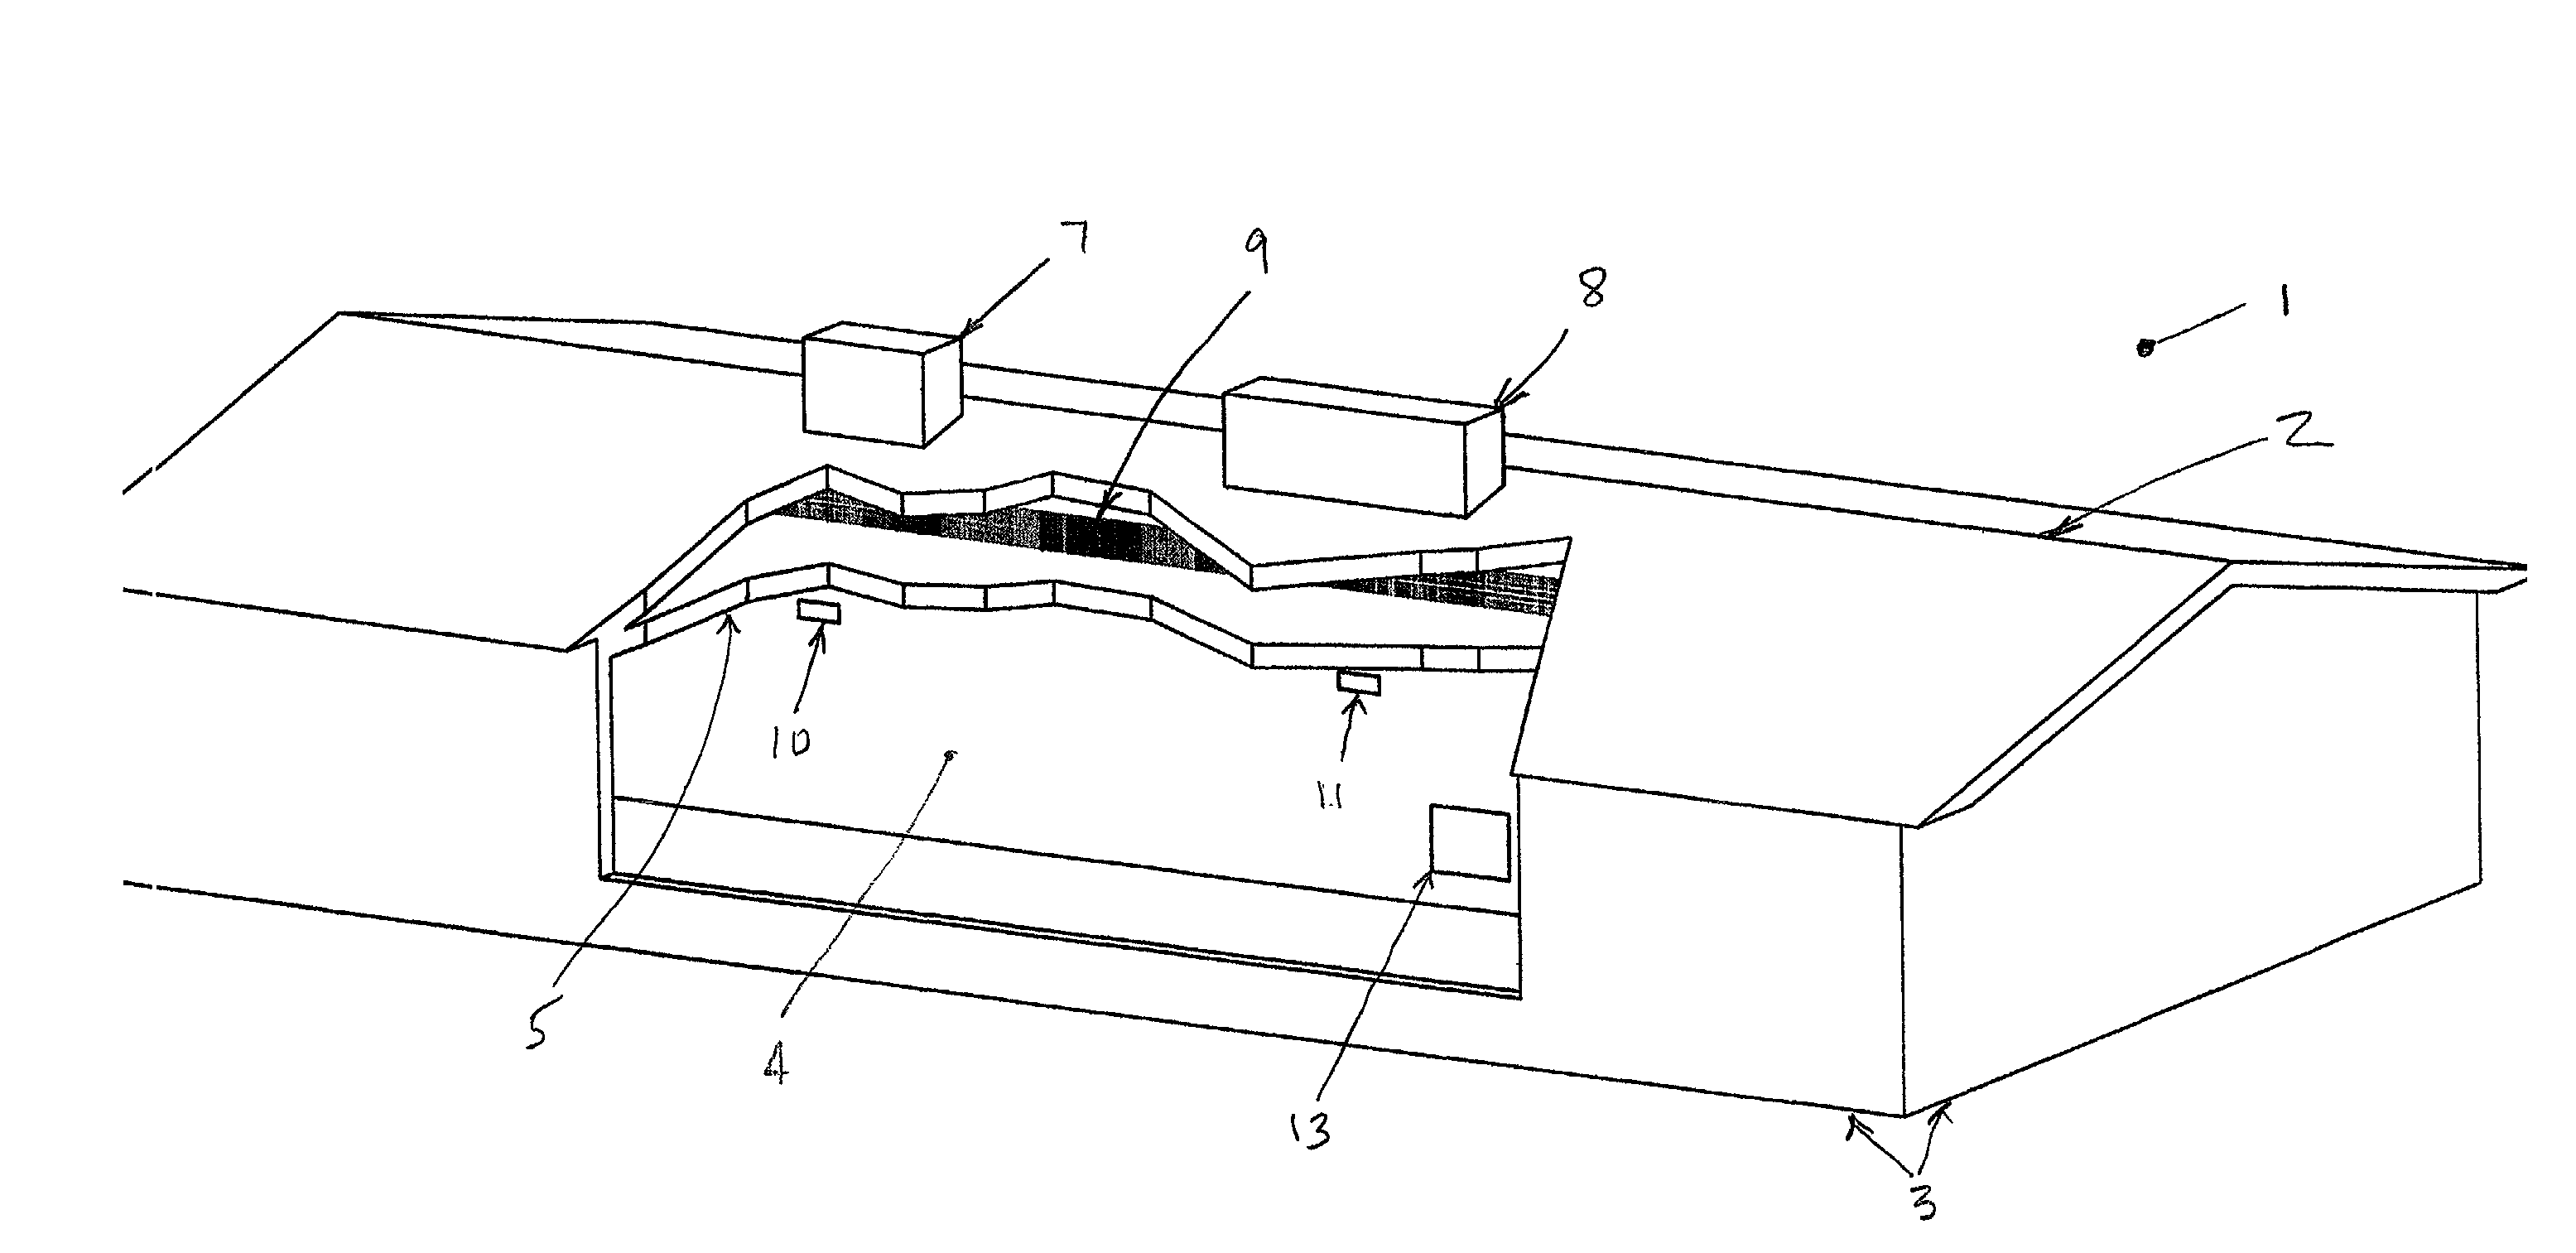 Filter apparatus for HVAC system